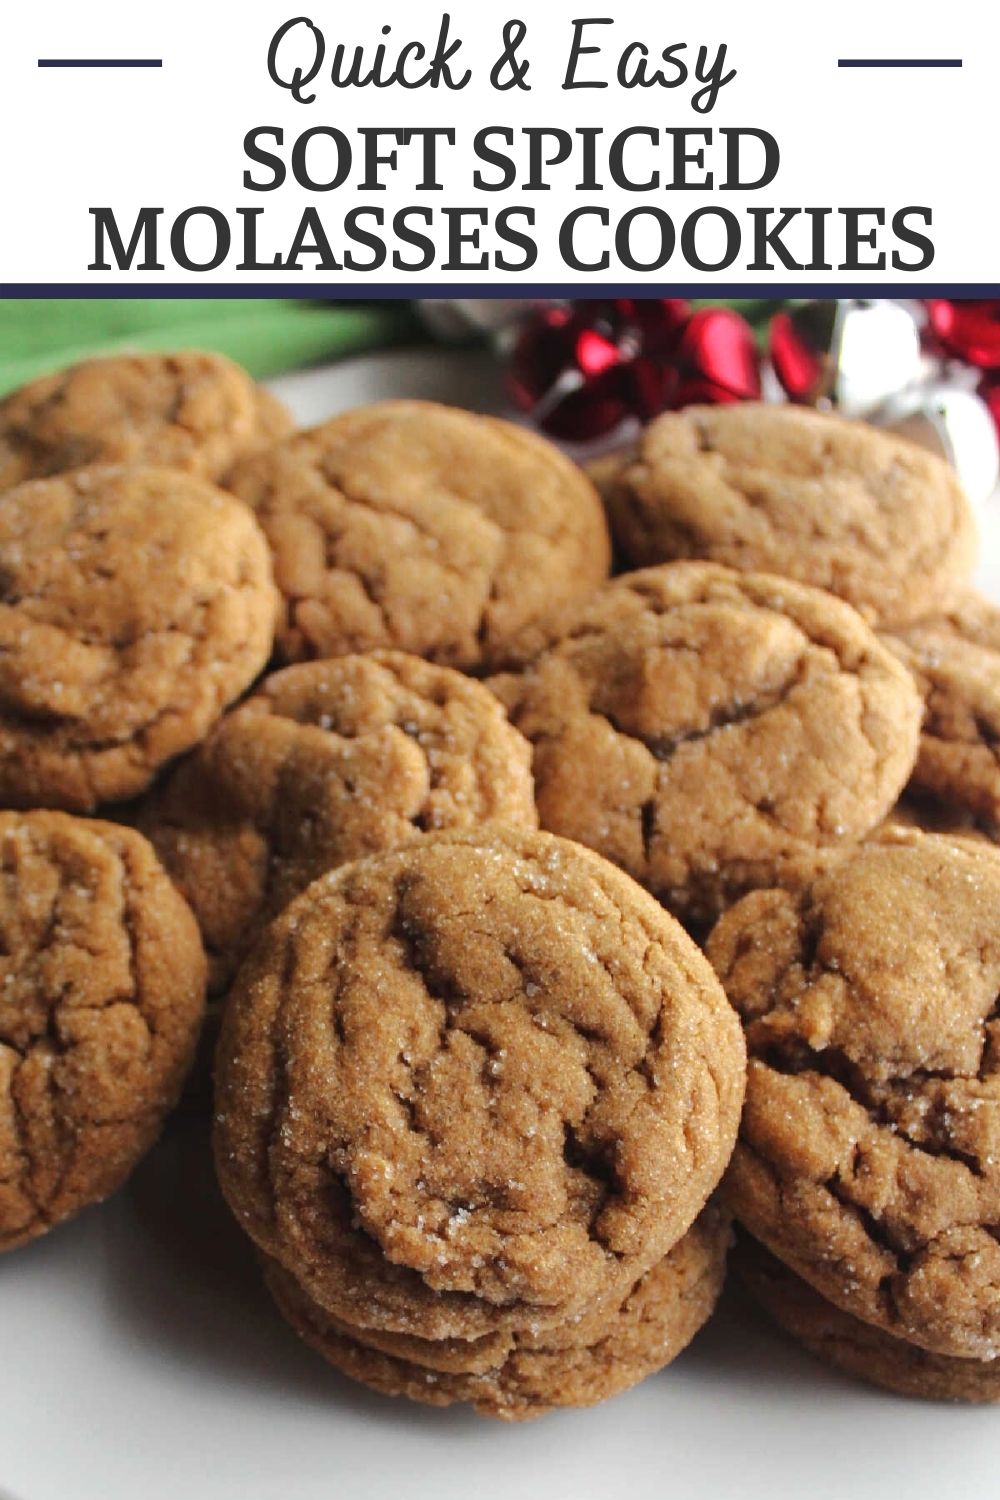 These molasses cookies are warm, sweet and spicy. They are also soft and chewy. They are sure to be a hit on your holiday cookie tray!